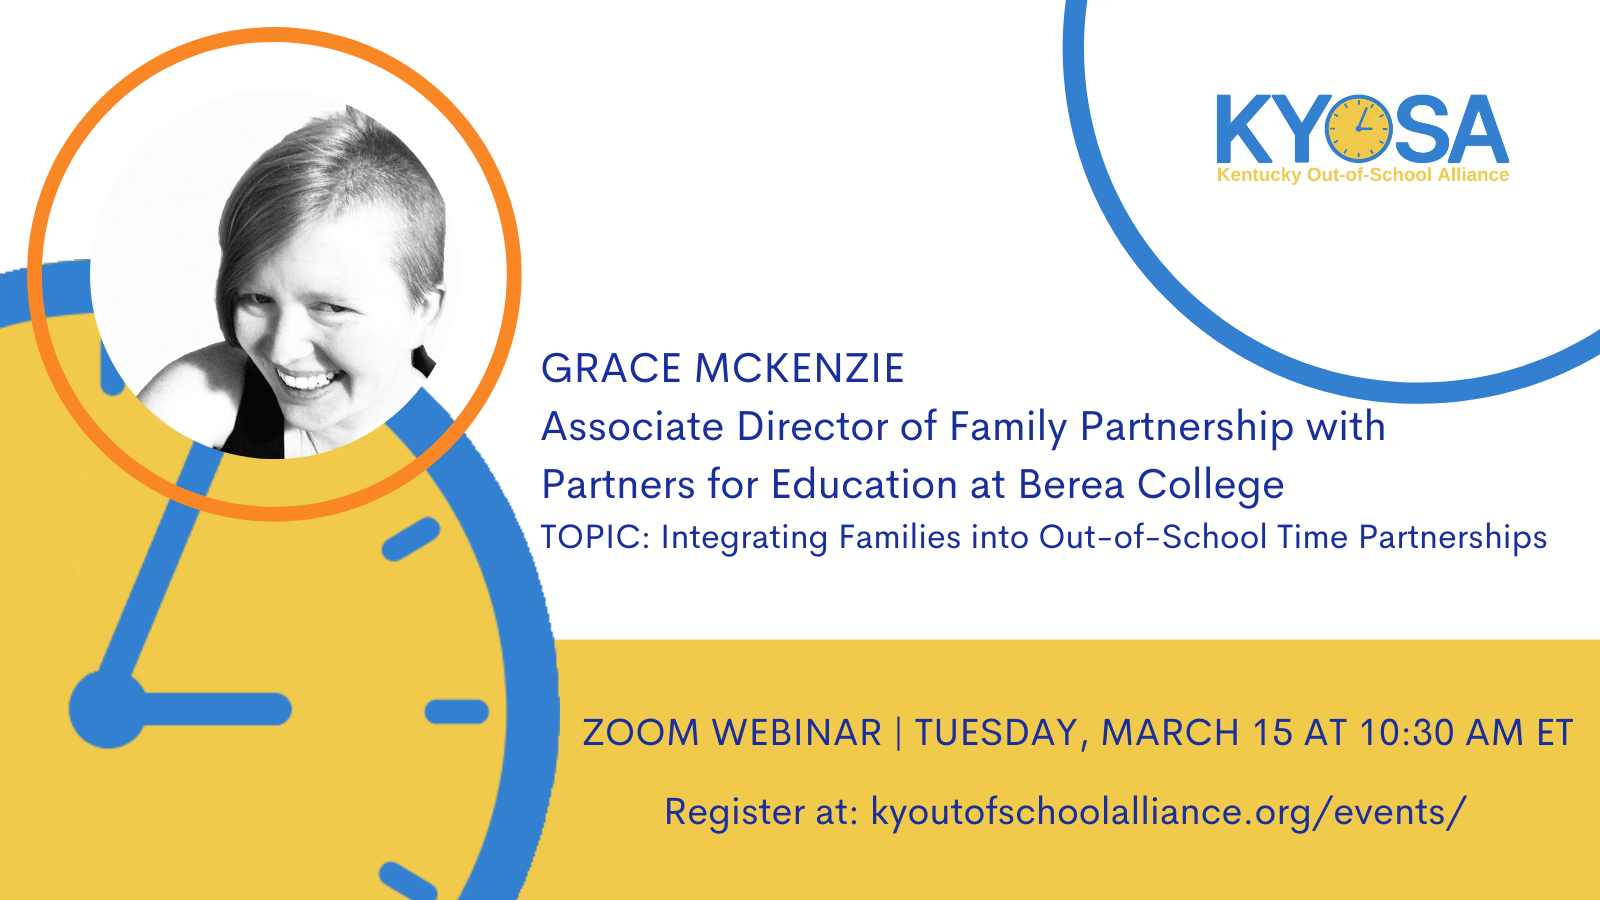 GRACE MCKENZIE Associate Director of Family Partnership with Partners for Education